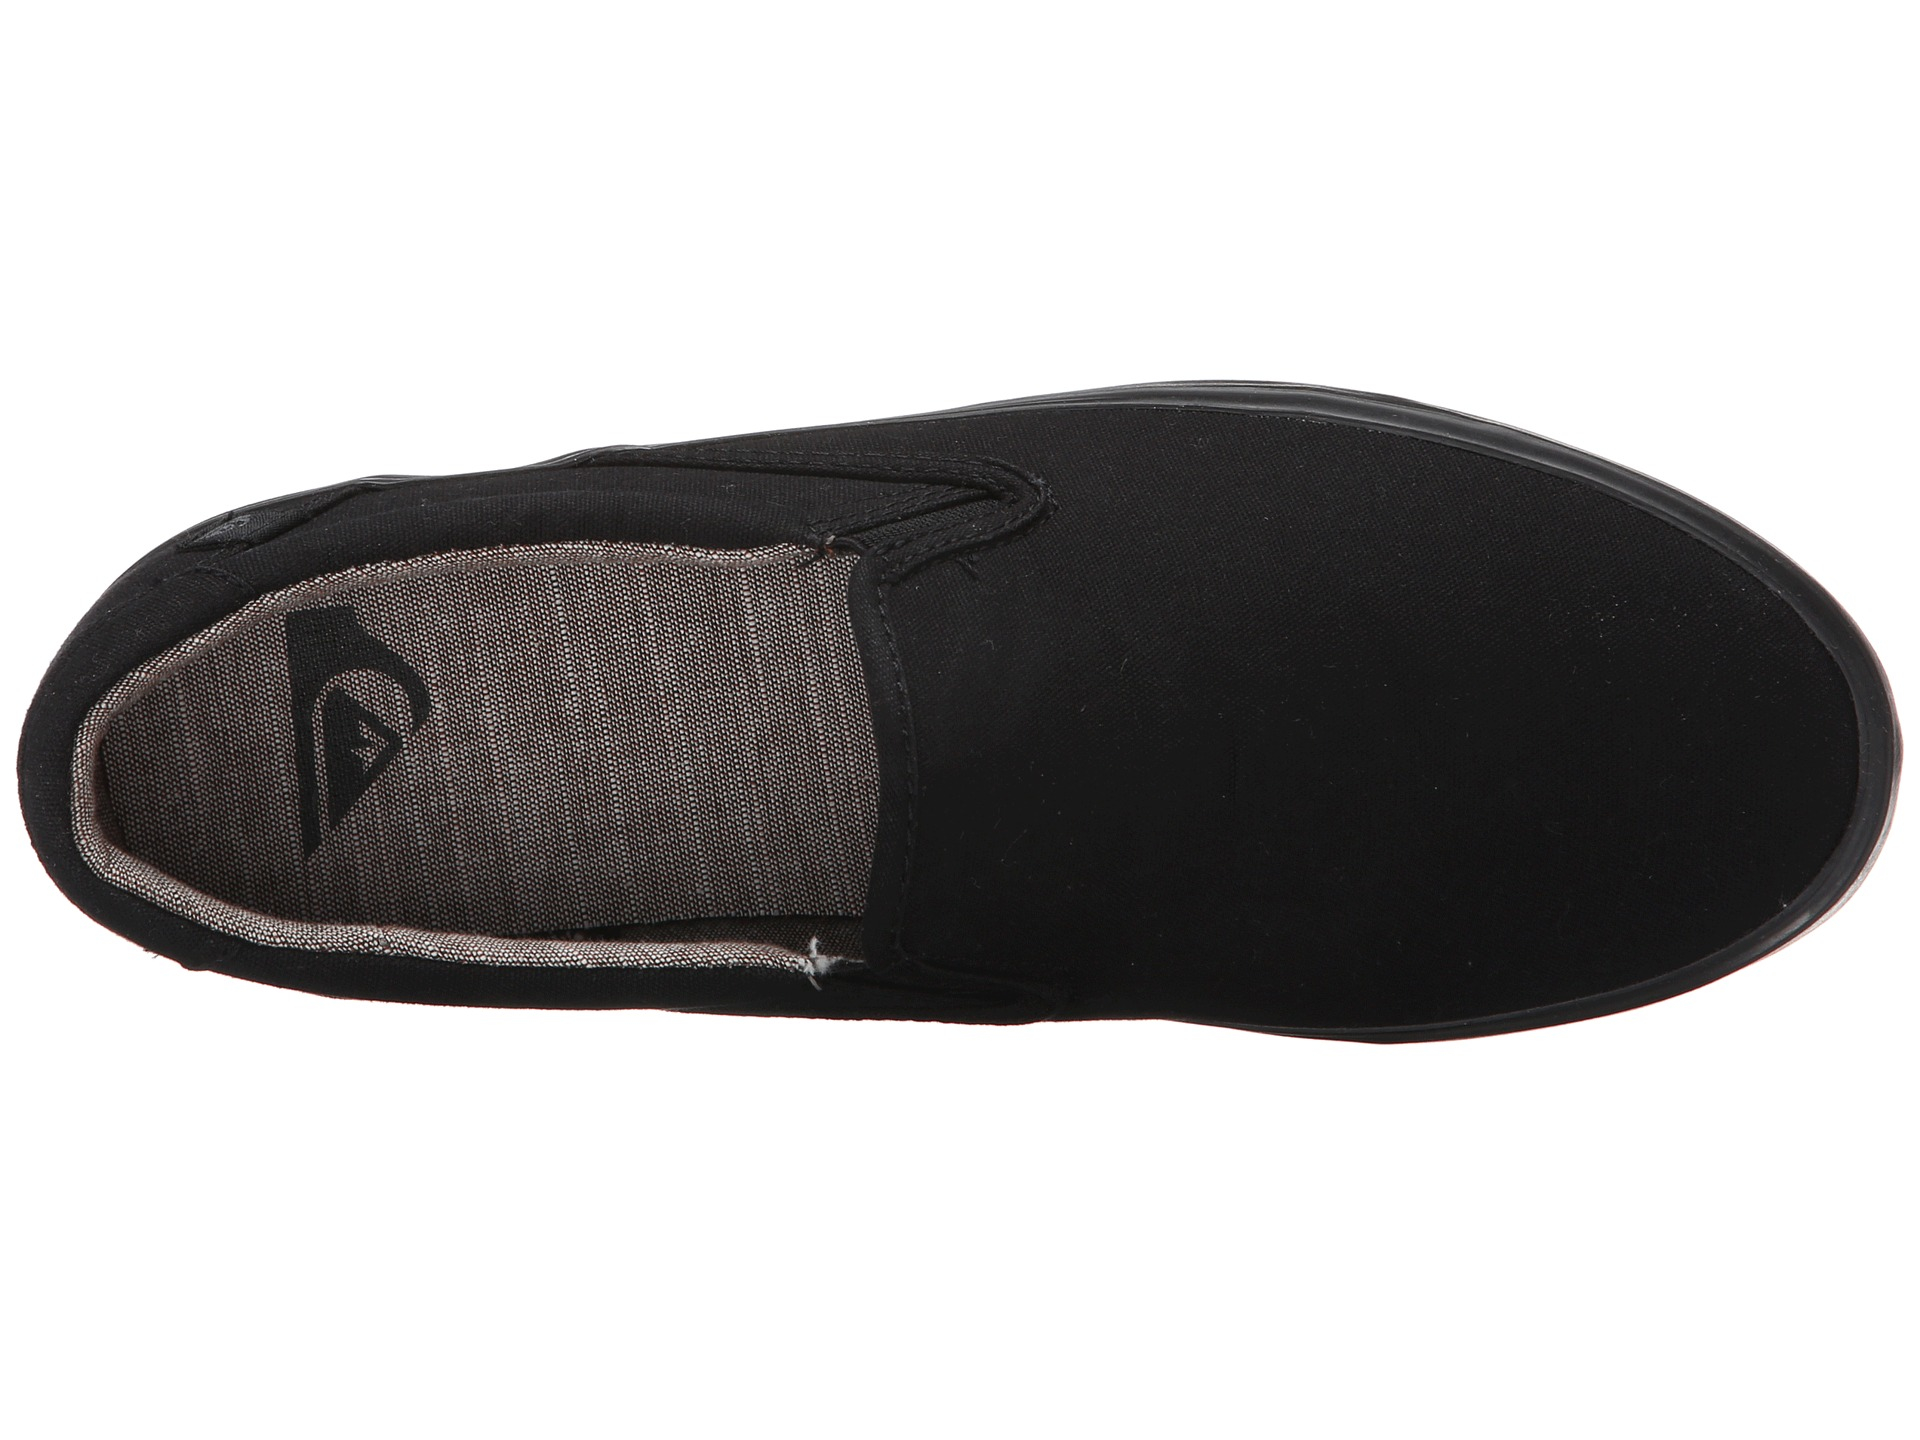 quiksilver slip on shoes